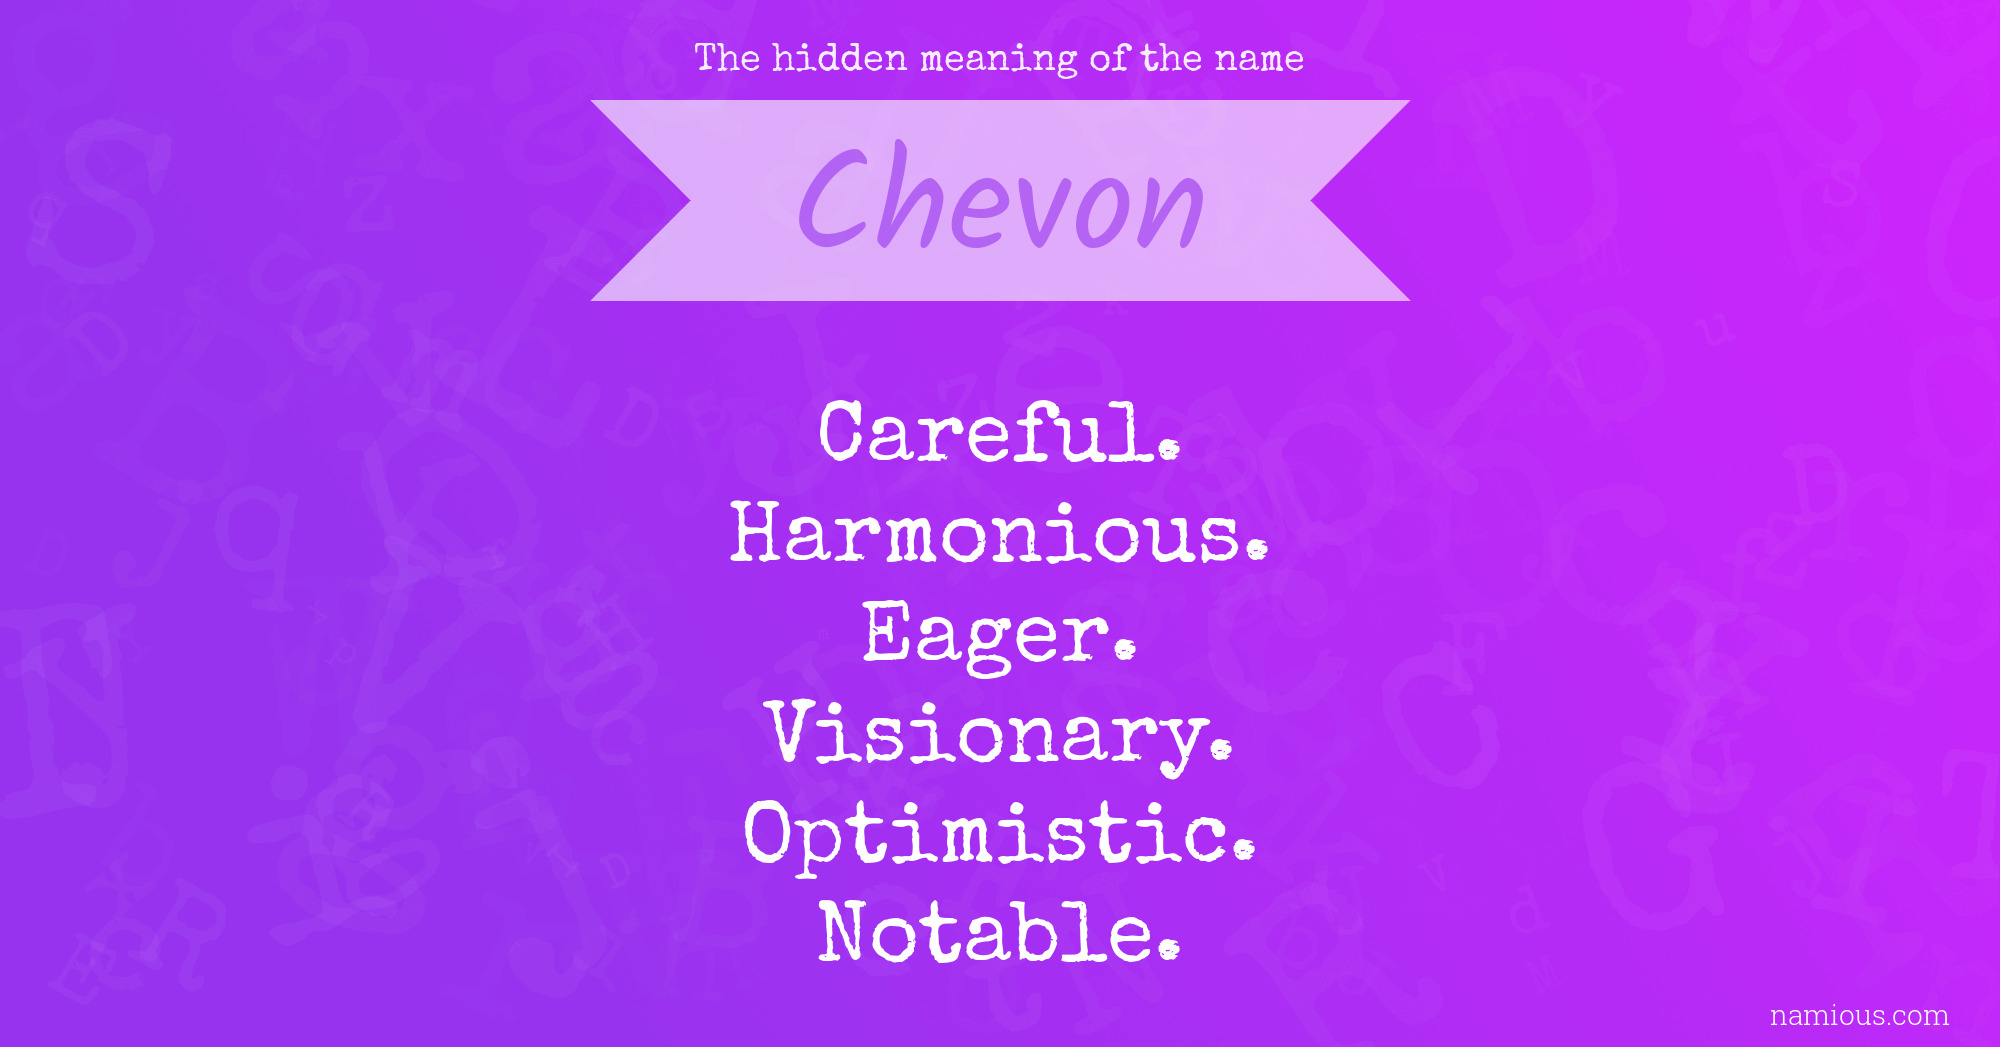 The hidden meaning of the name Chevon